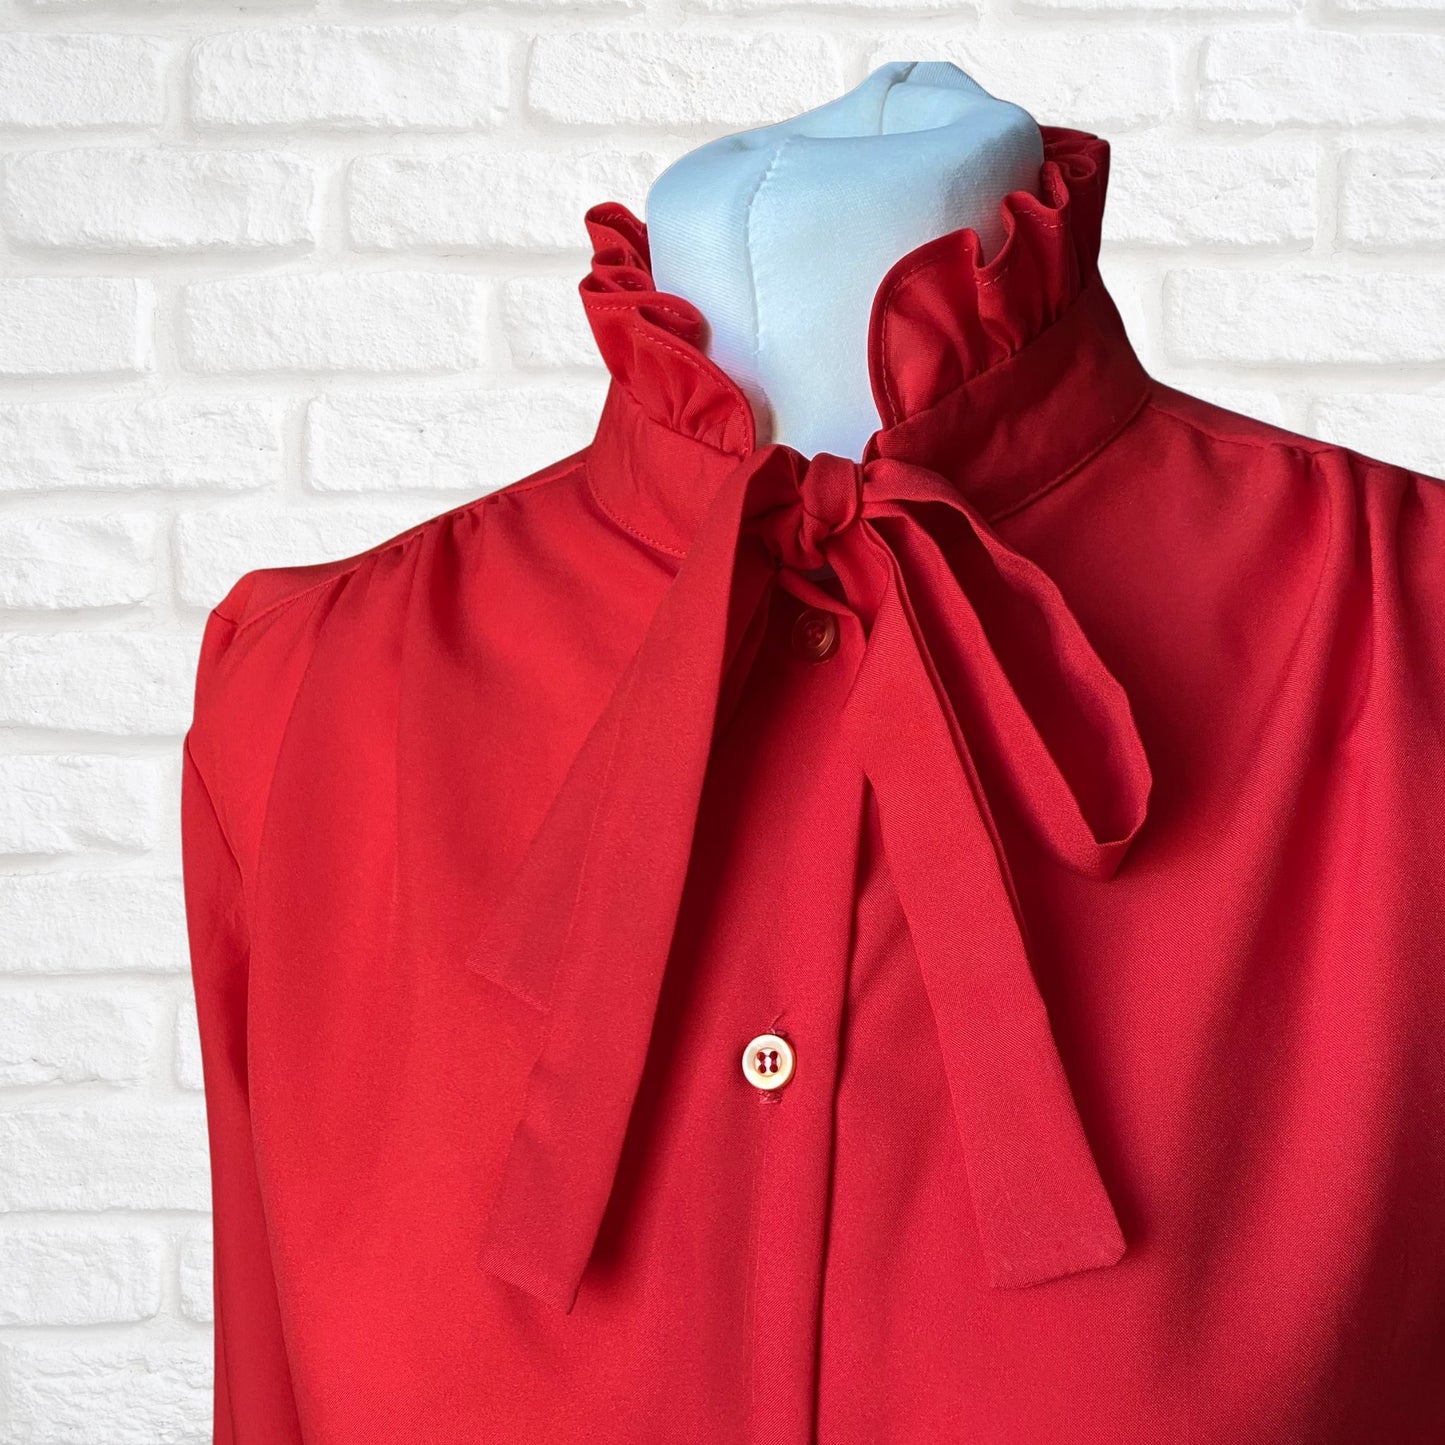 Red 80s secretary blouse with high frill collar and tie neck. Approx UK size 10-12